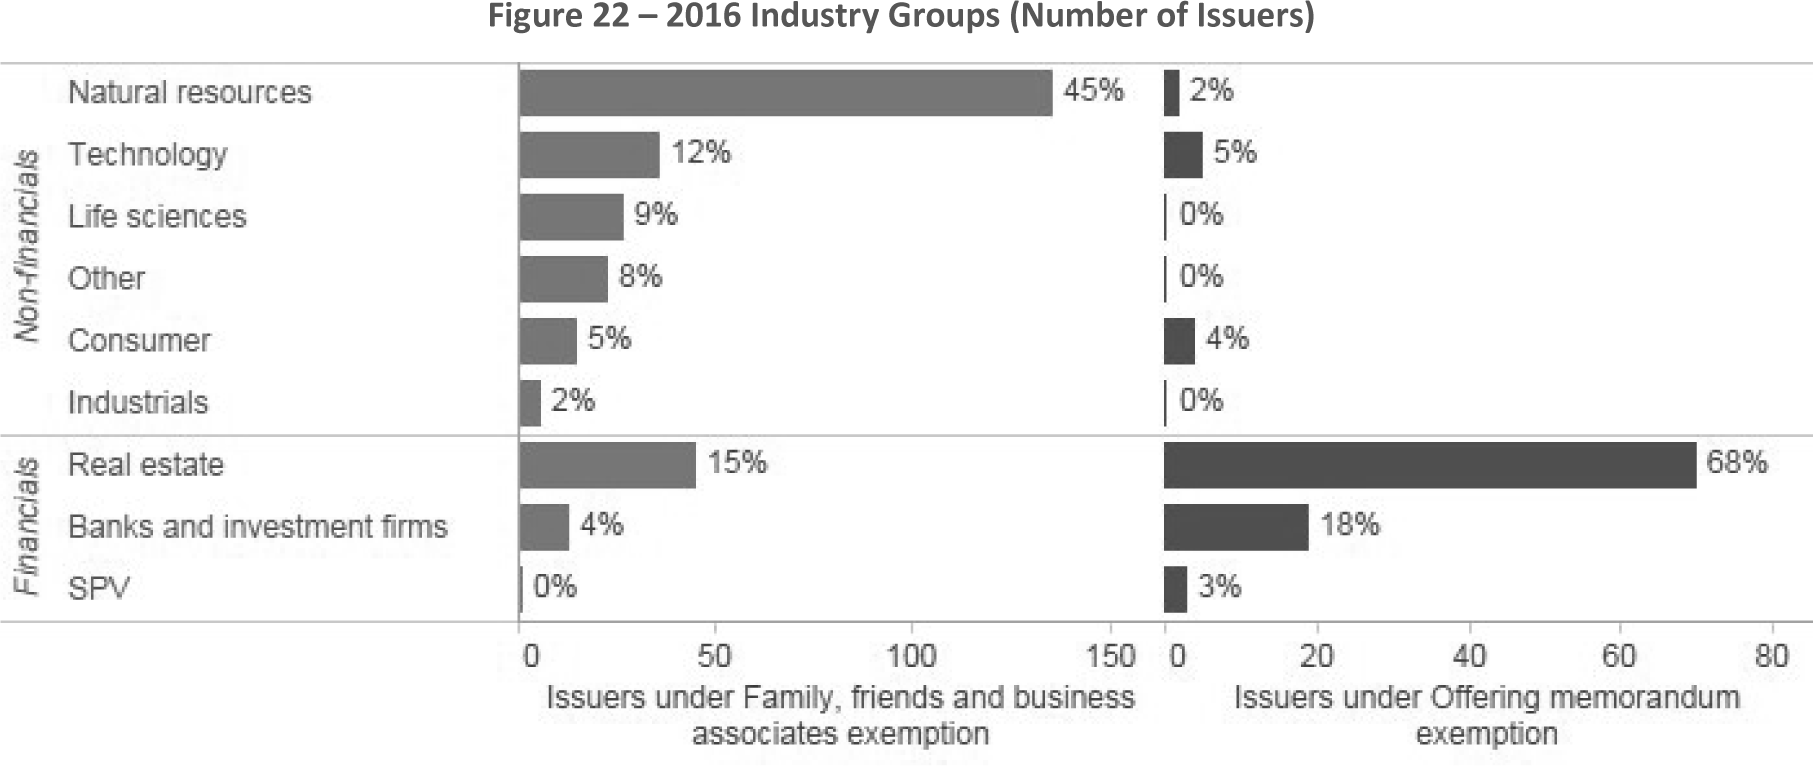 Figure 23 -- 2016 Industry Groups (Number of Issuers)